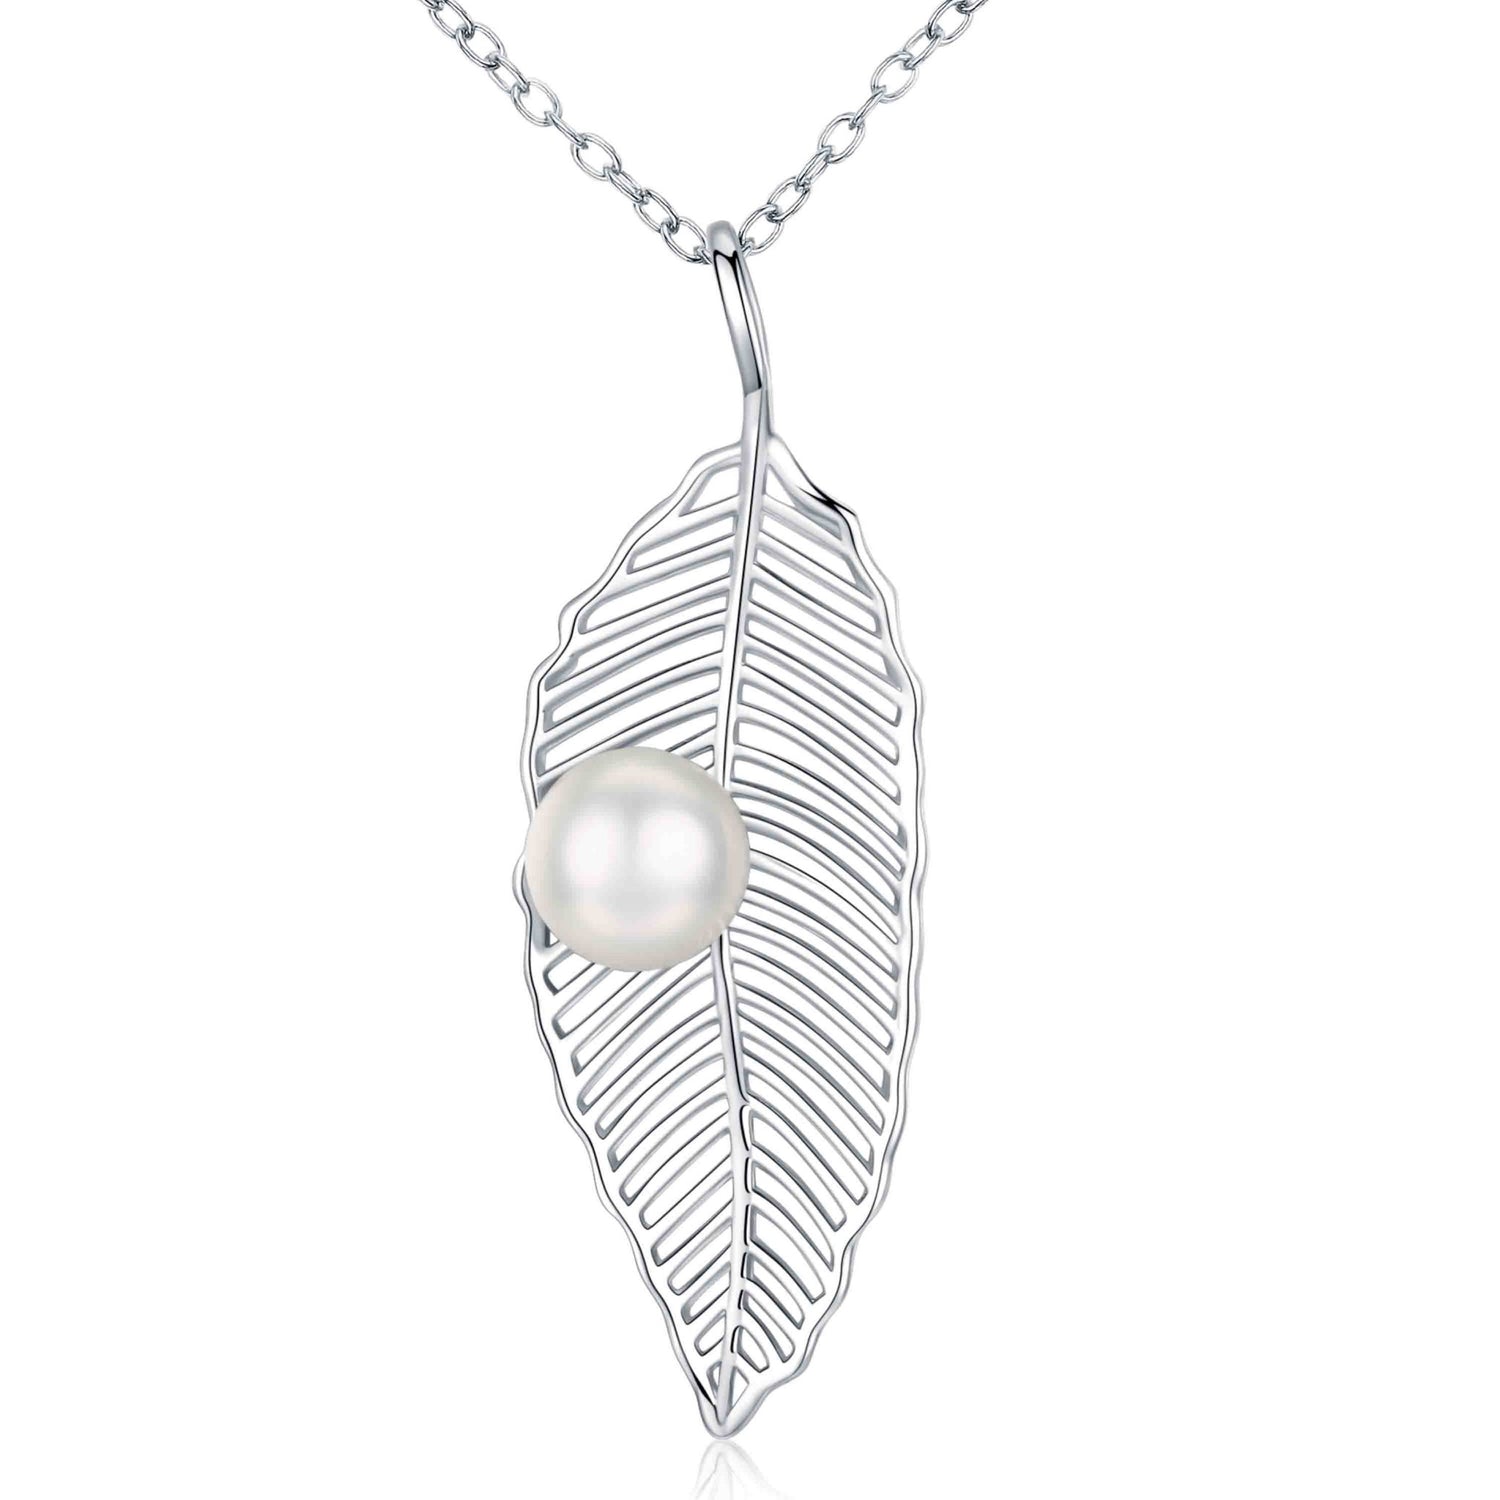 Silver Leaf Pearl Necklace - Timeless Pearl